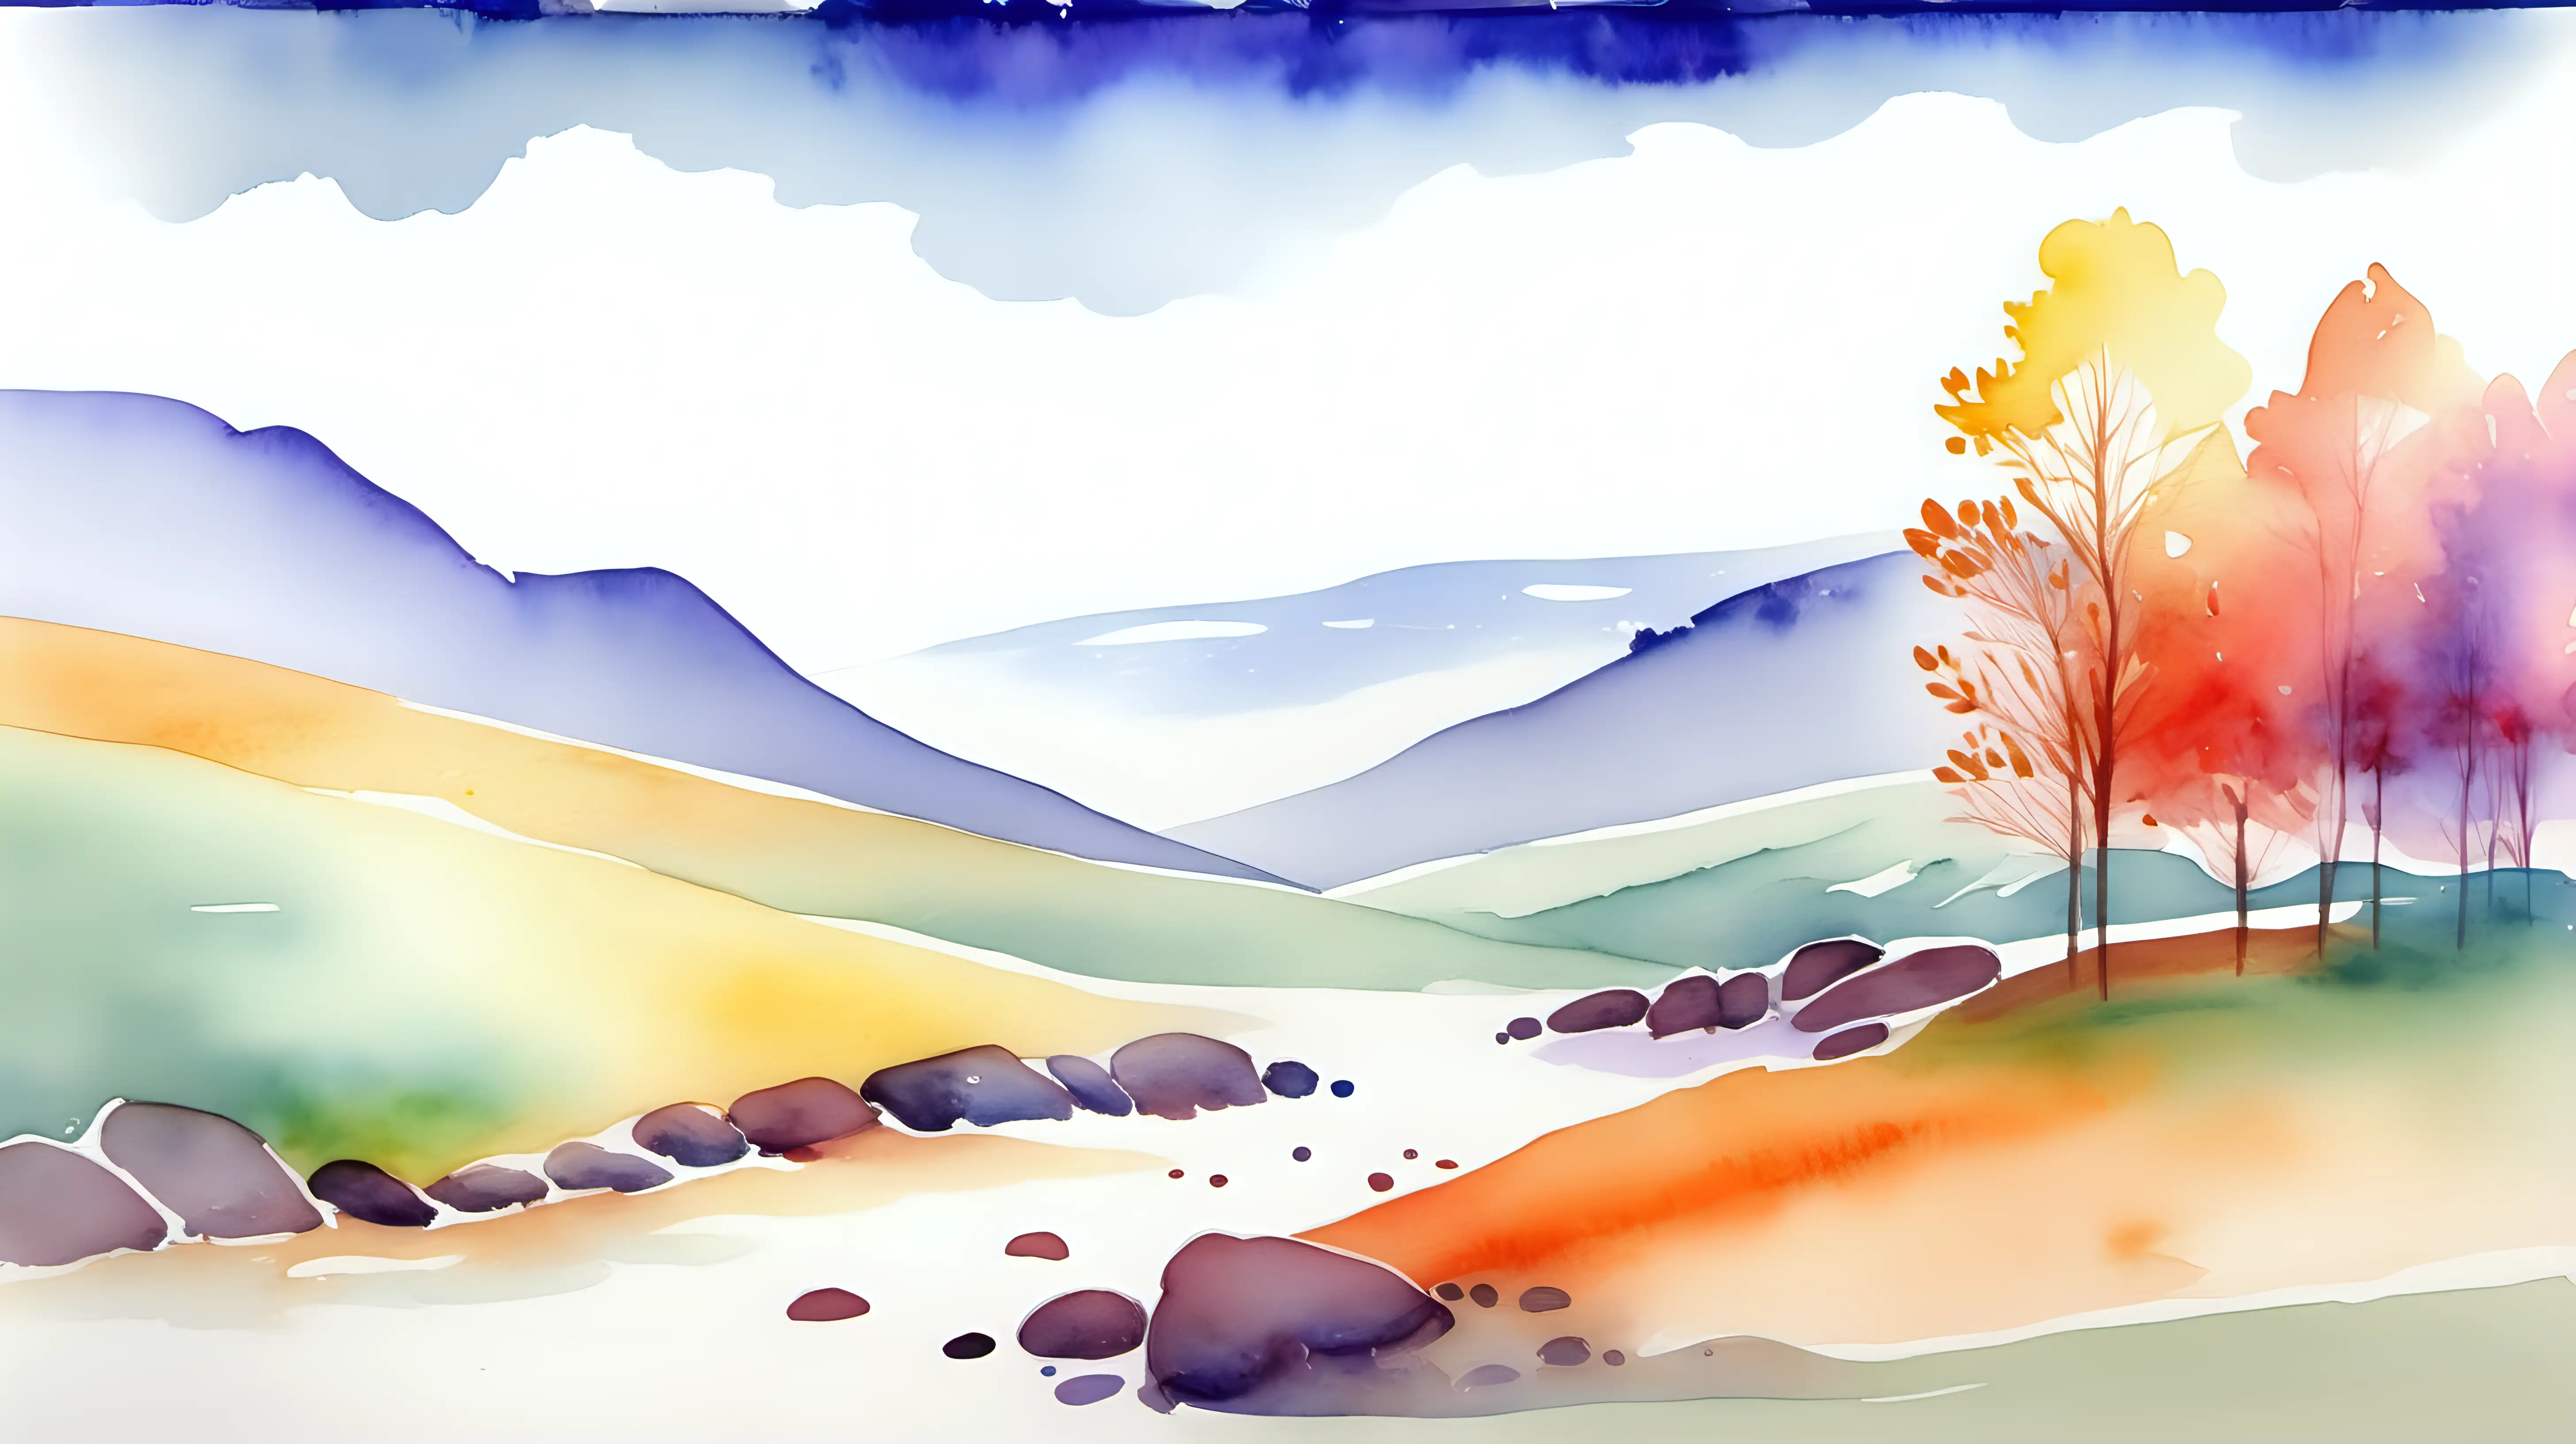 Vibrant Watercolor Landscape Painting A Whimsical Journey Through Nature